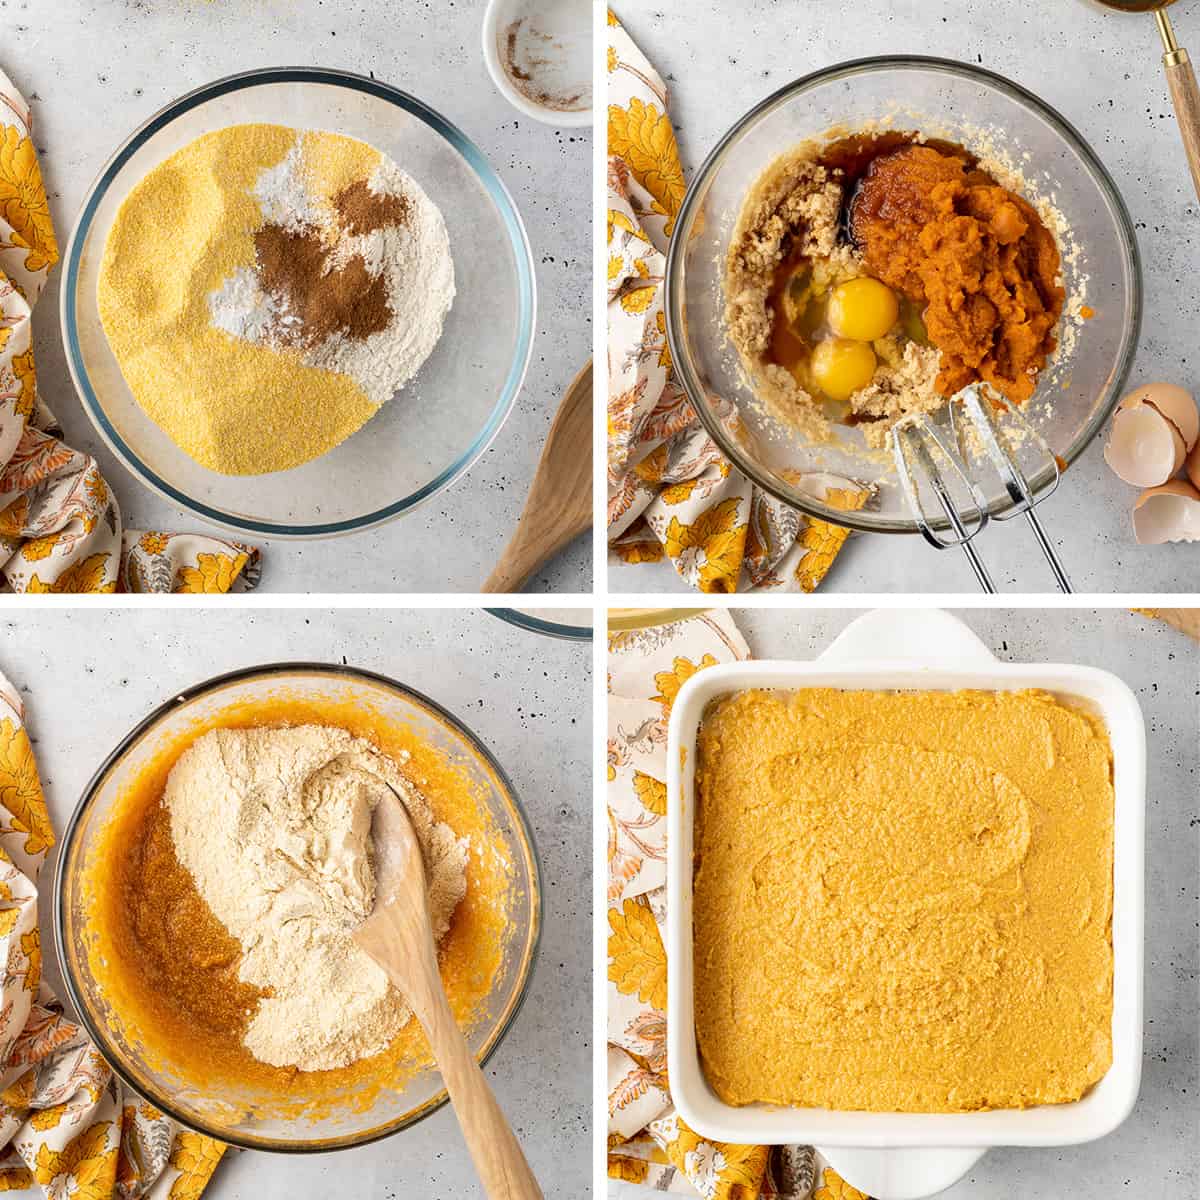 Four images showing dry ingredients and wet ingredients in separate bowls and then combined in one bowl and a baking dish.